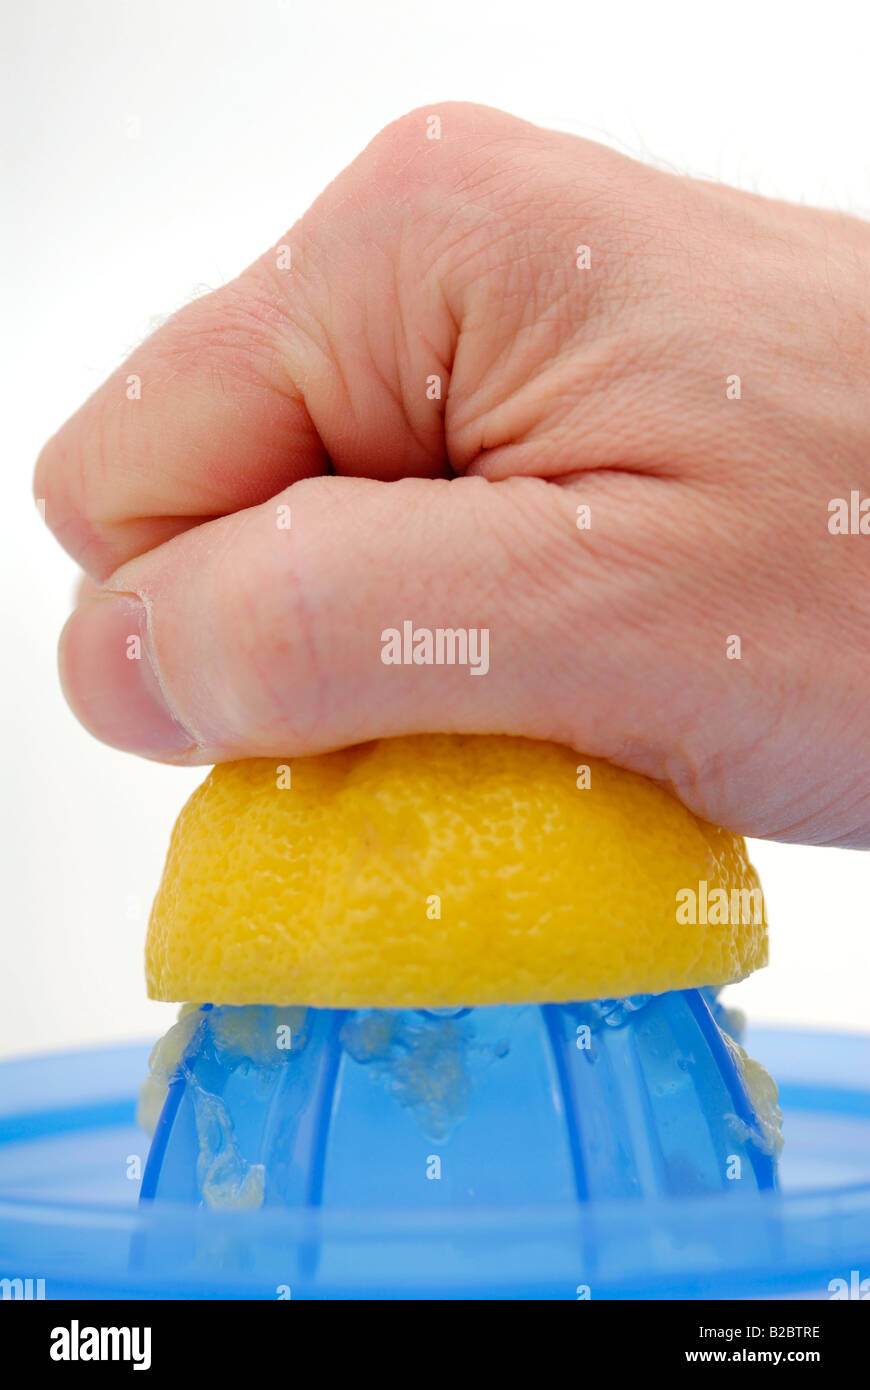 Lemon being wrung out Stock Photo